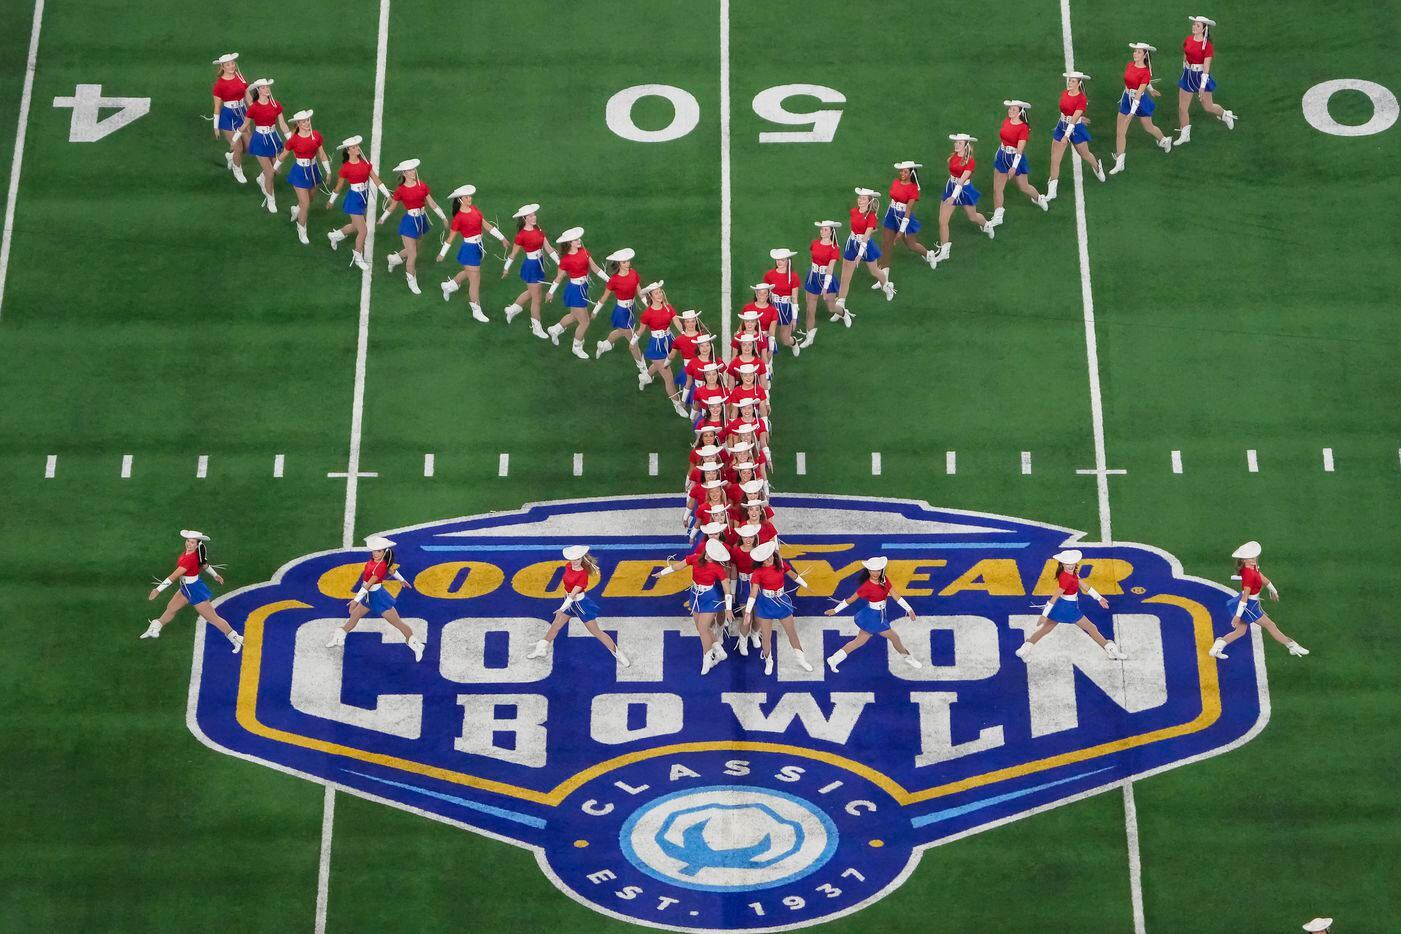 The Kilgore College Rangerettes perform the Cotton Bowl NCAA college football game between...